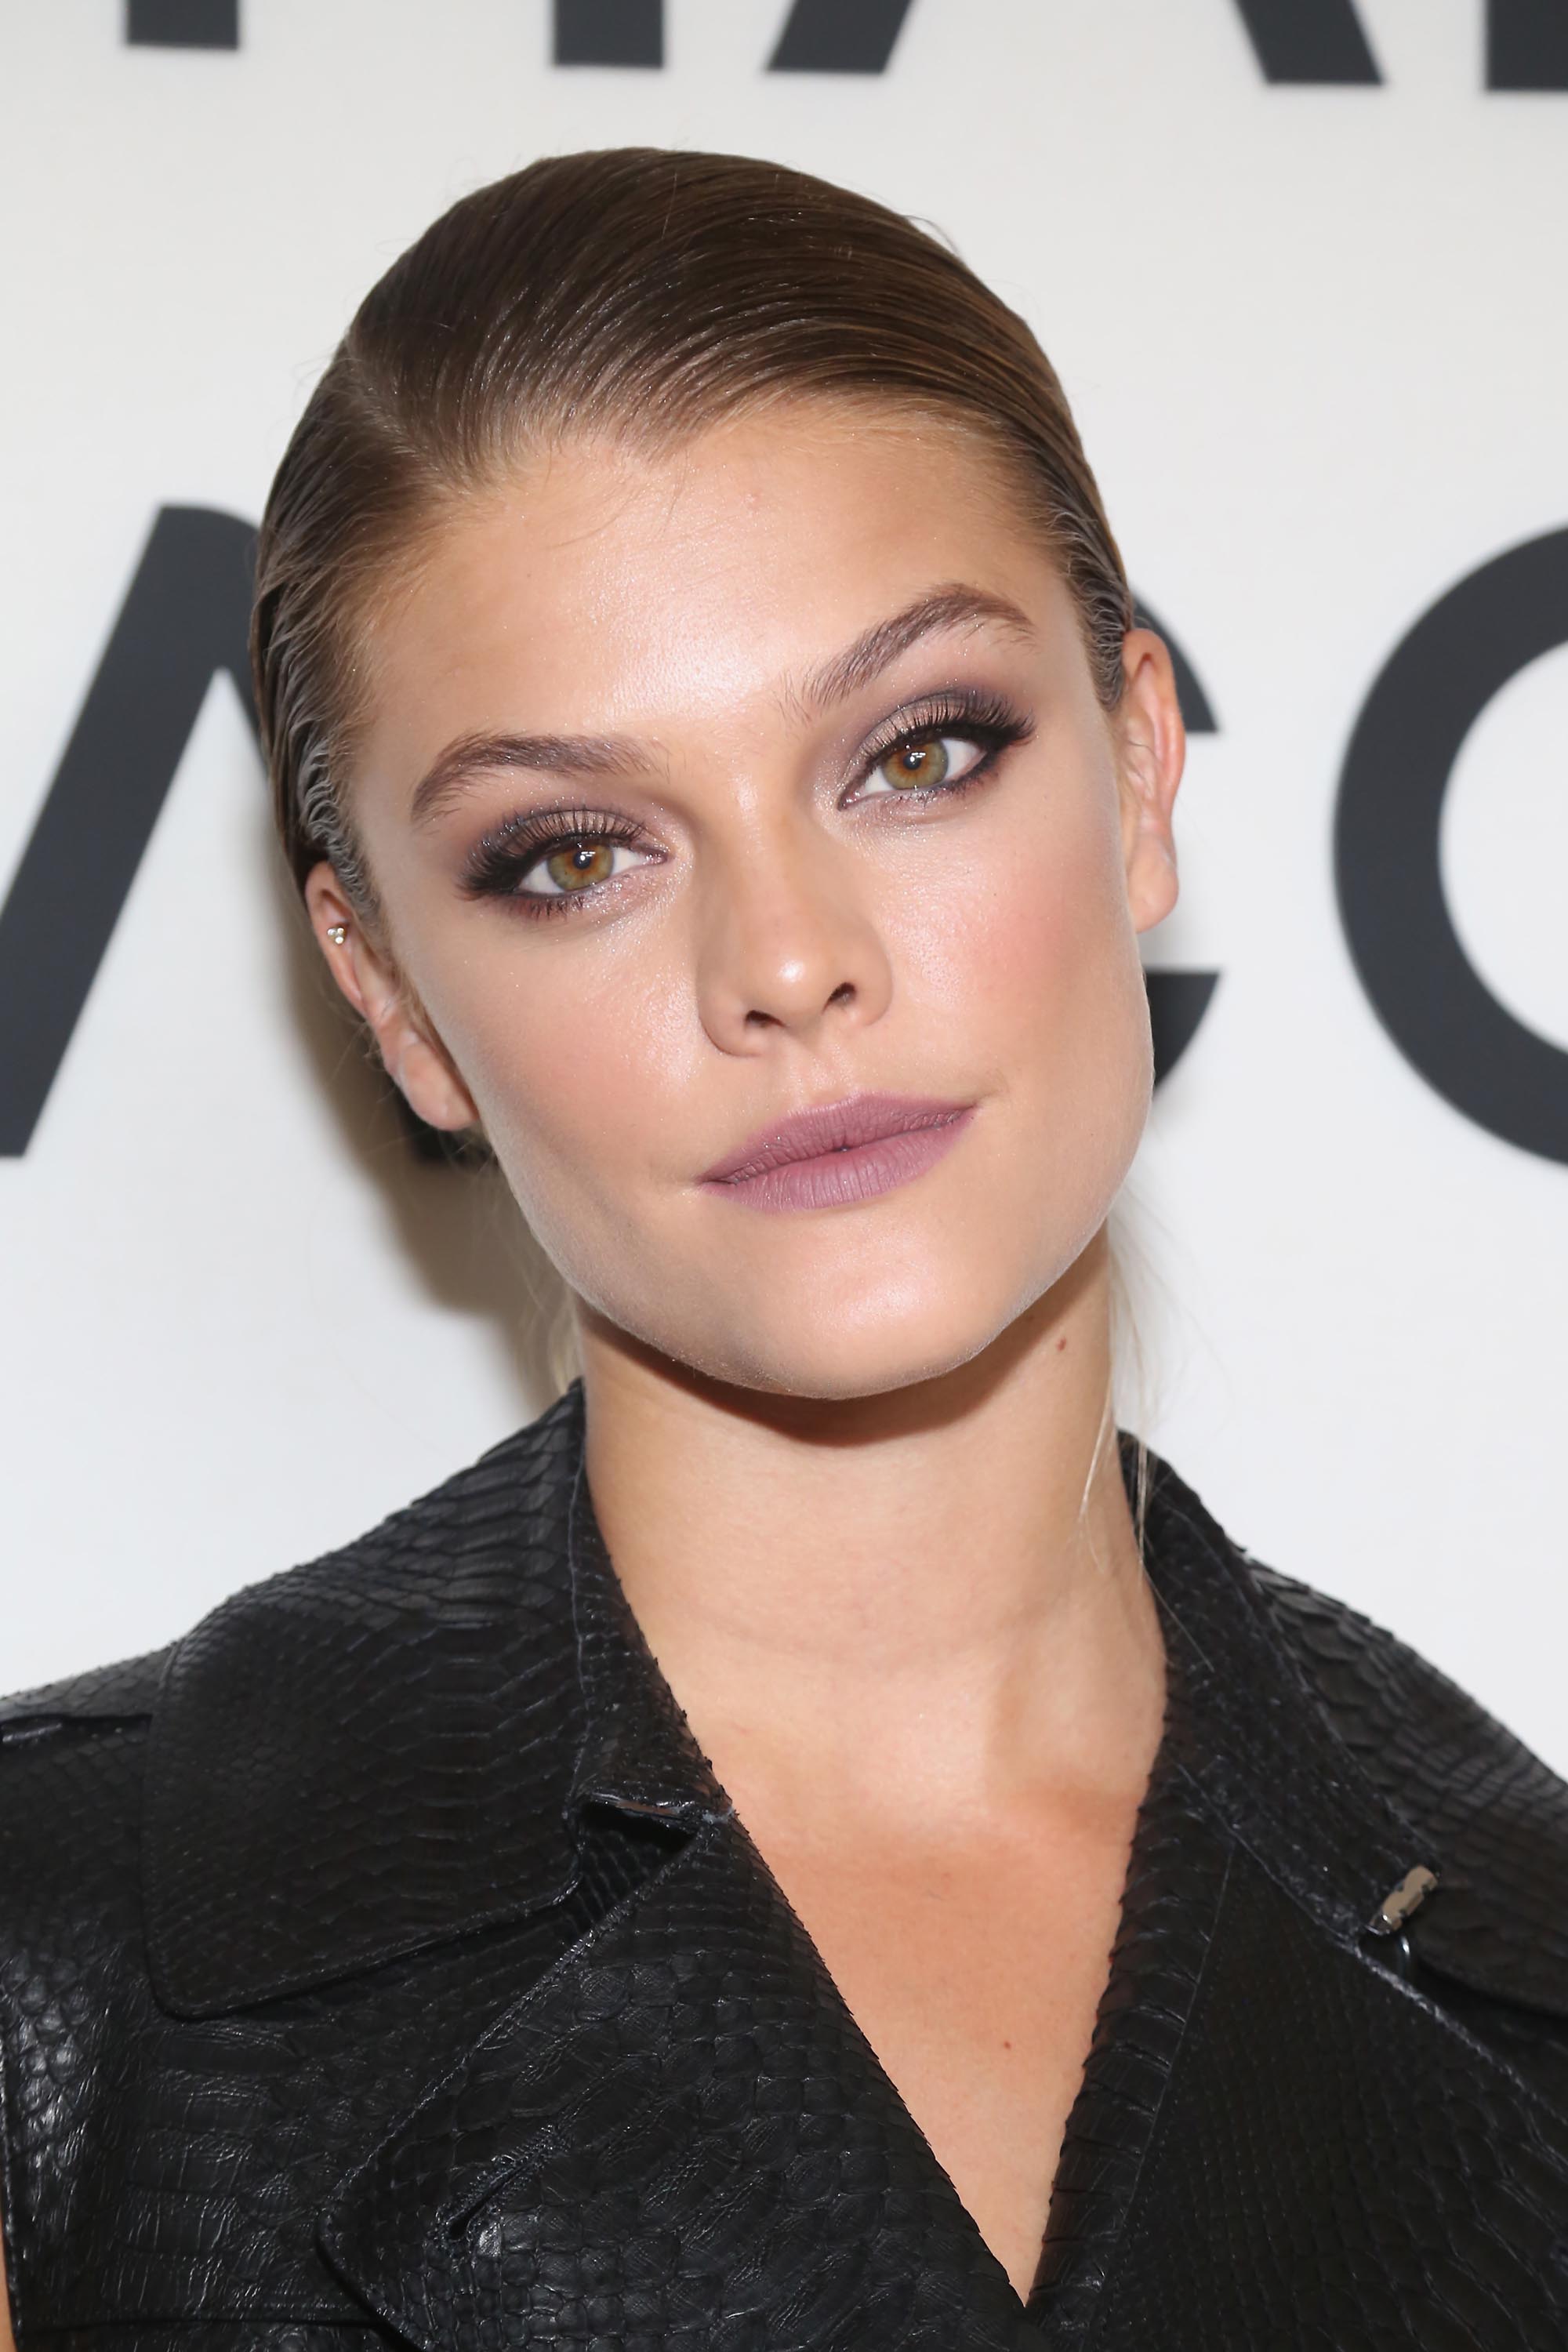 Nina Agdal attends Michael Kors Celebrates the New Access Smartwatch Collection